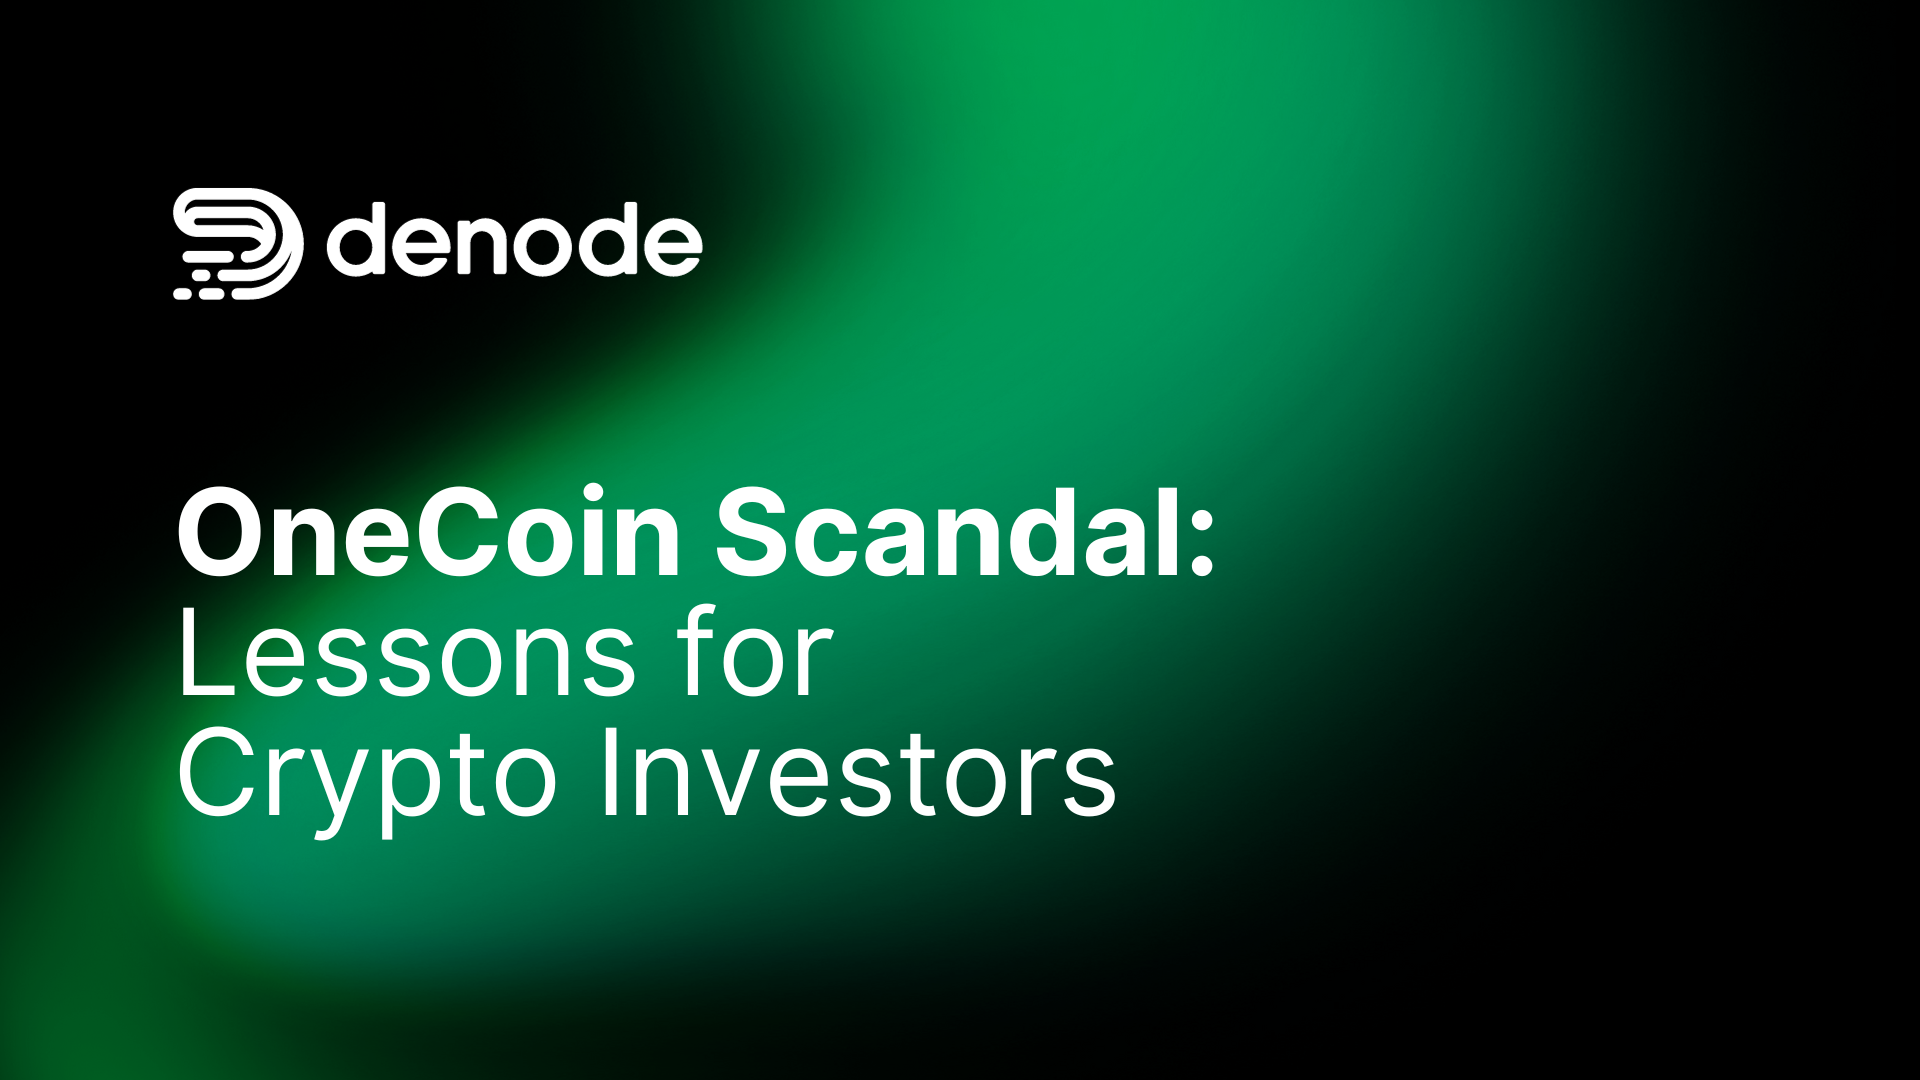 OneCoin Scandal: Lessons for Crypto Investors